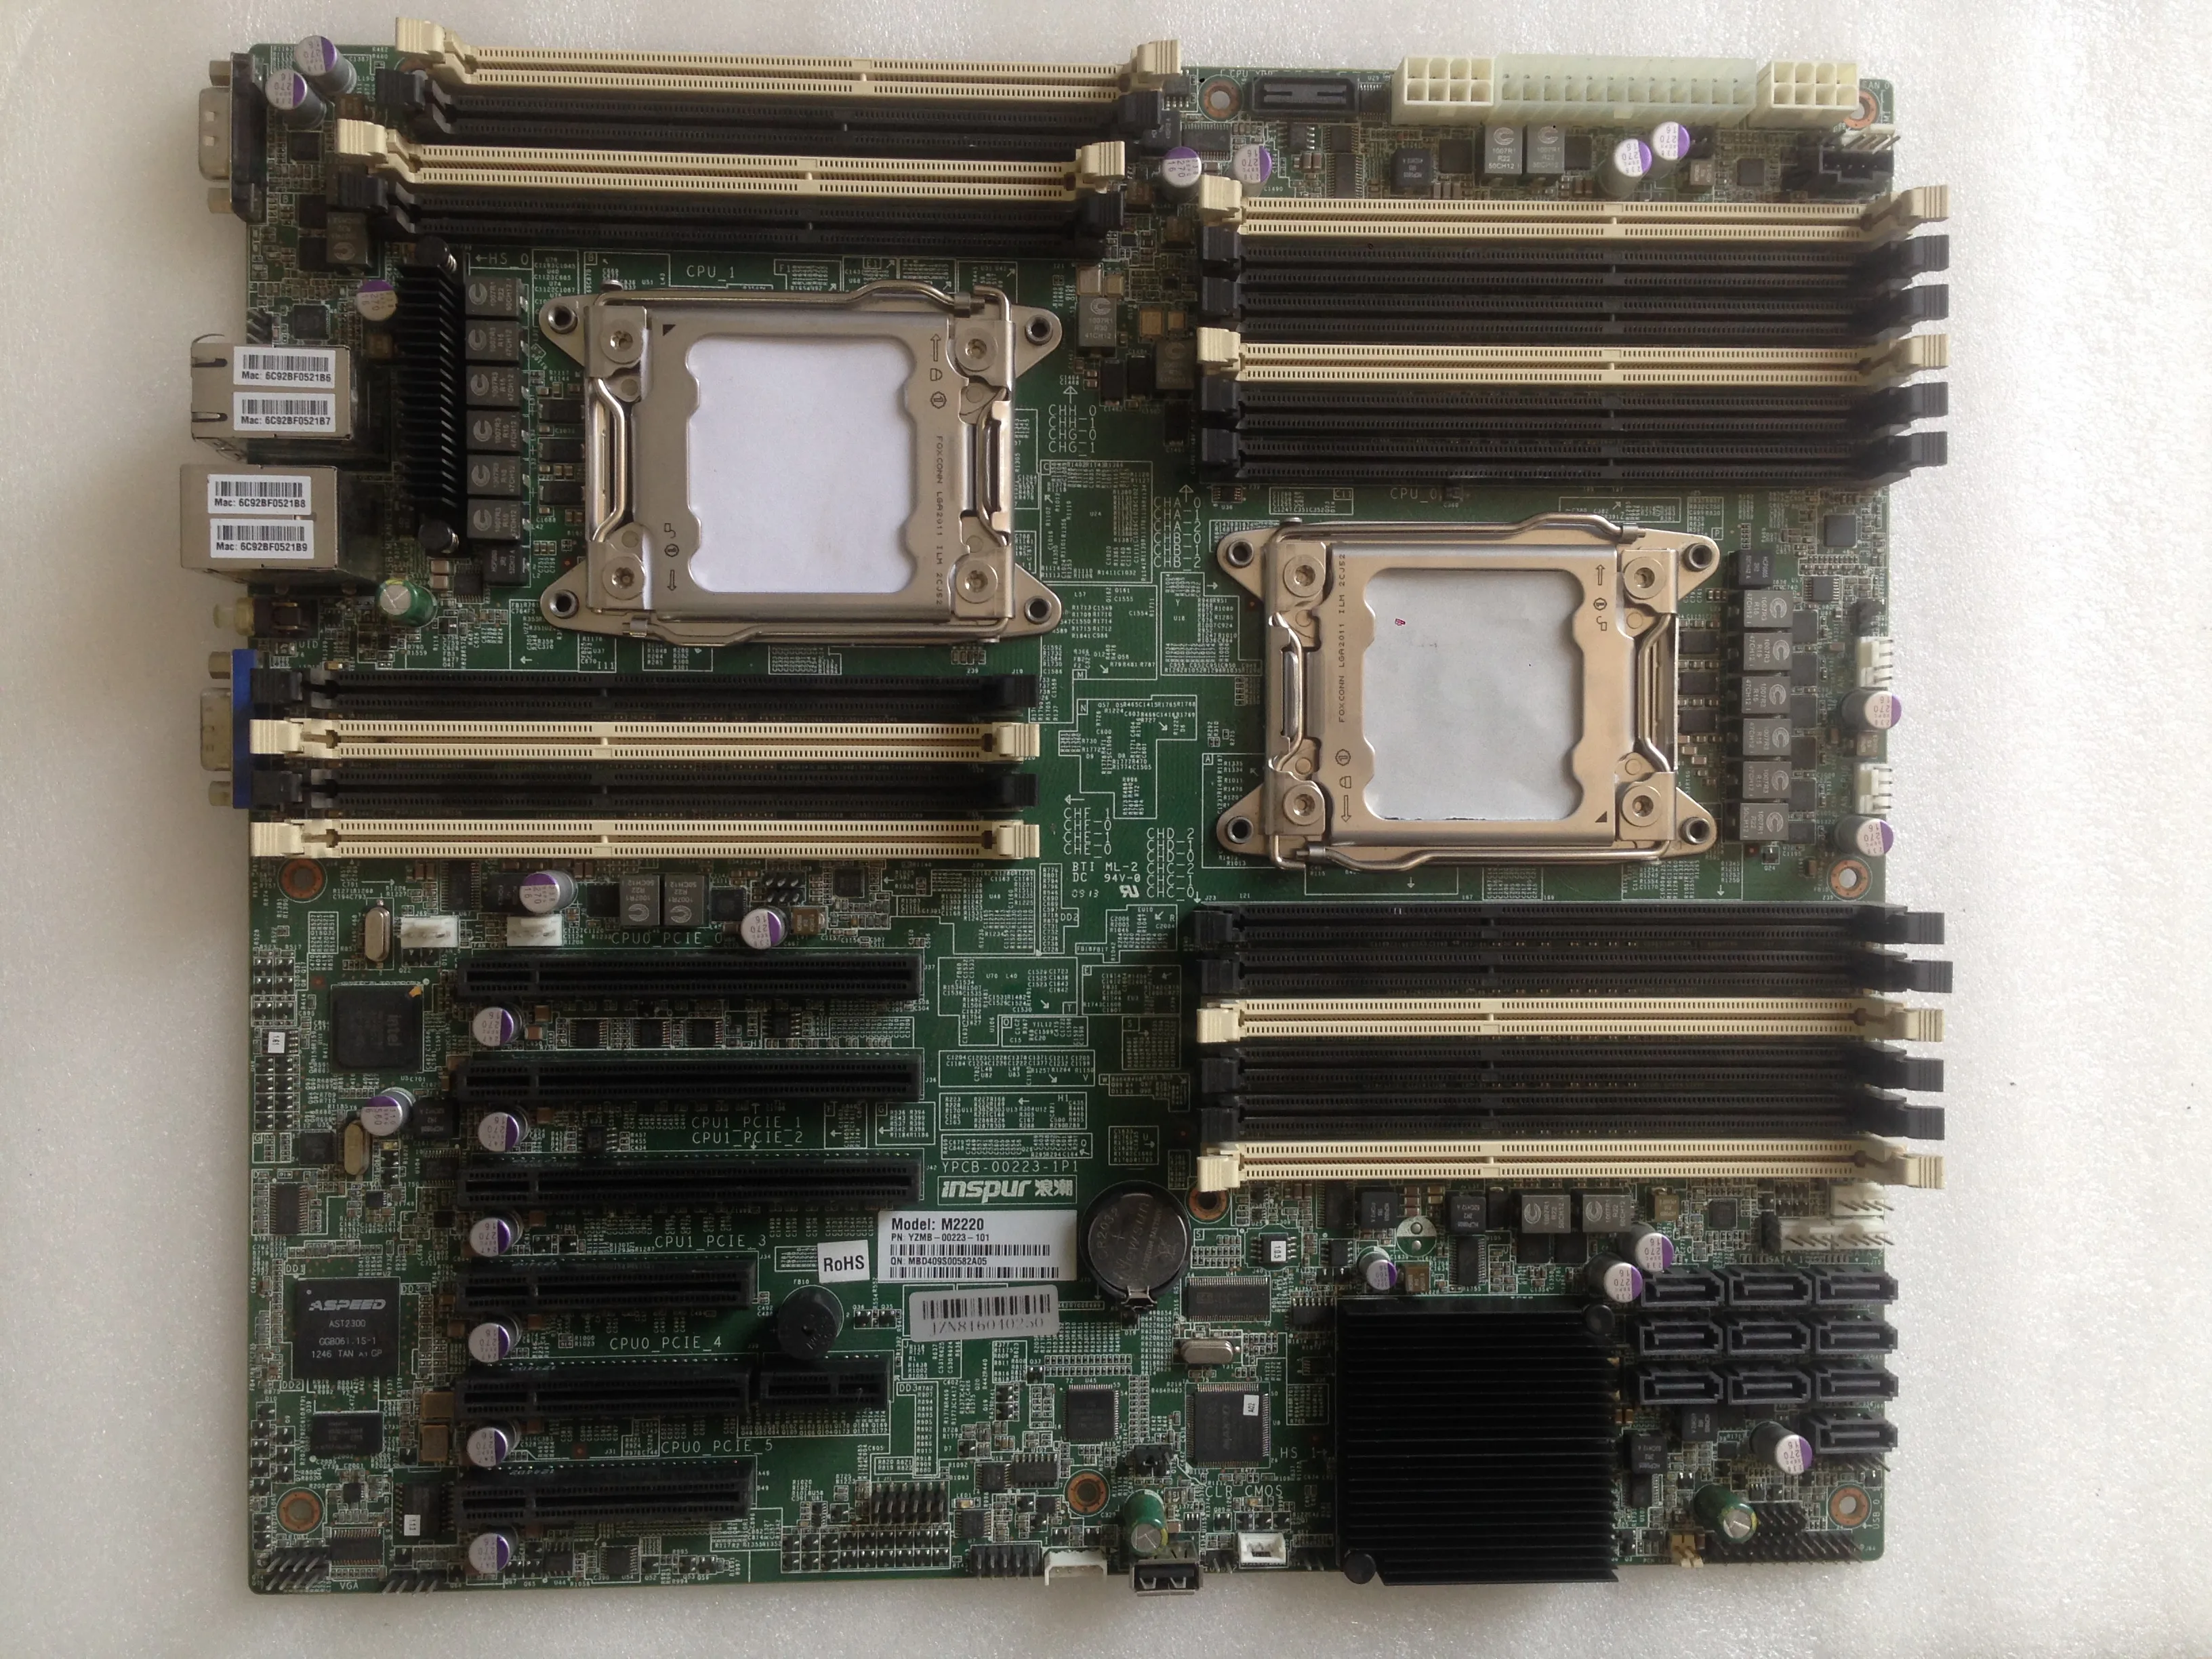 For Inspur nf5270m3 server motherboard yzmb-00223-101 m2220 series